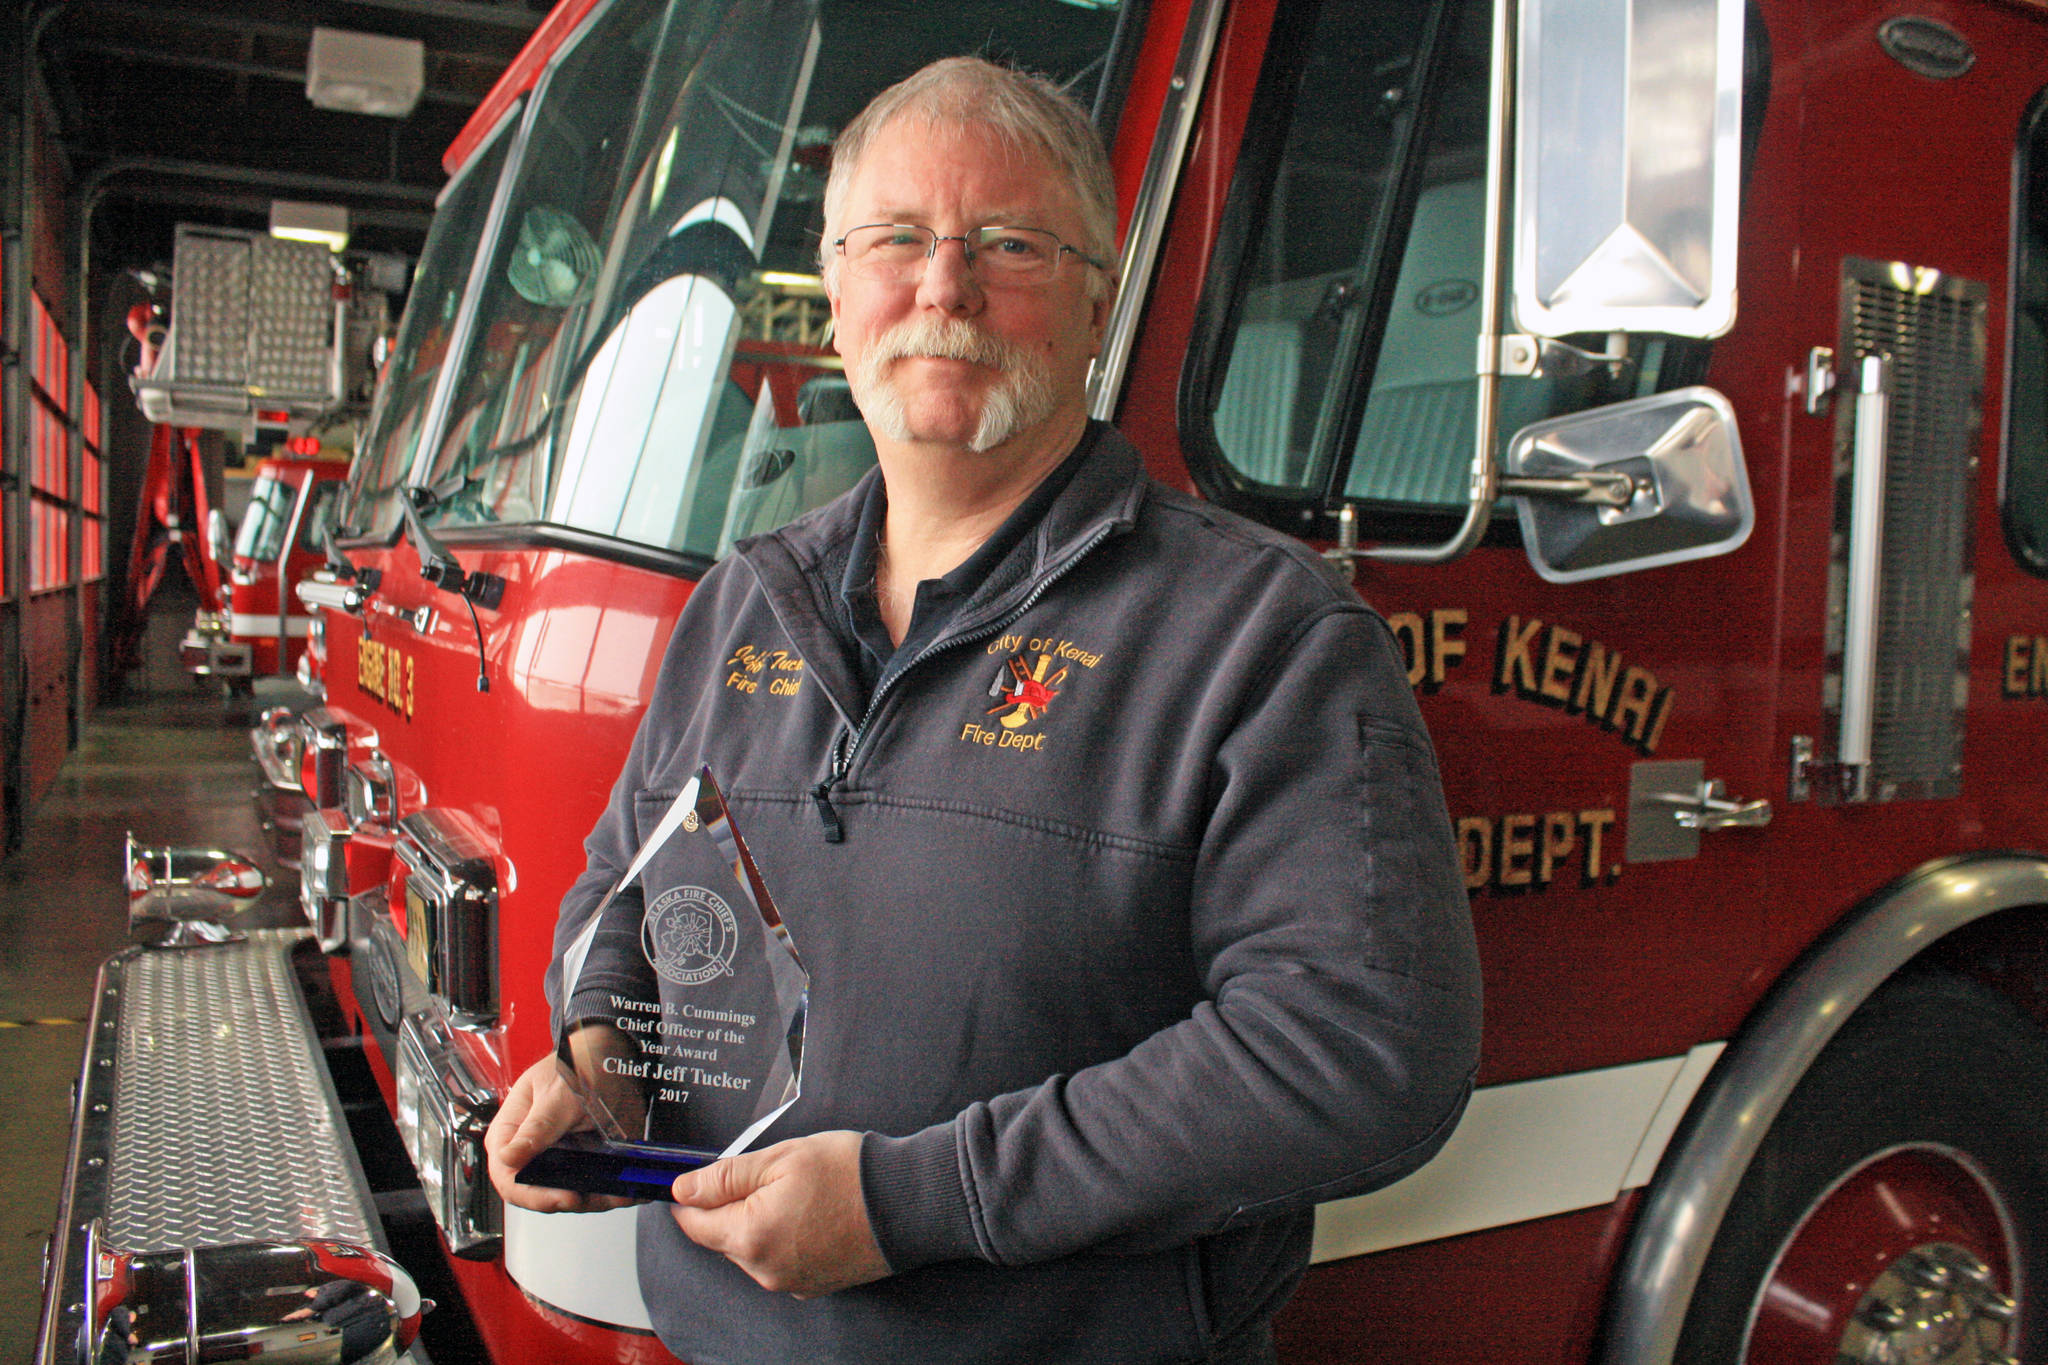 Kenai Fire Chief Jeff Tucker shows off the 2017 Warren B. Cummings Chief Officer of the Year Award at the Kenai Fire Station on Feb. 12. The award recognizes Tucker’s leadership success and contributions to the Alaska fire service. (Photo by Erin Thompson/Peninsula Clarion)